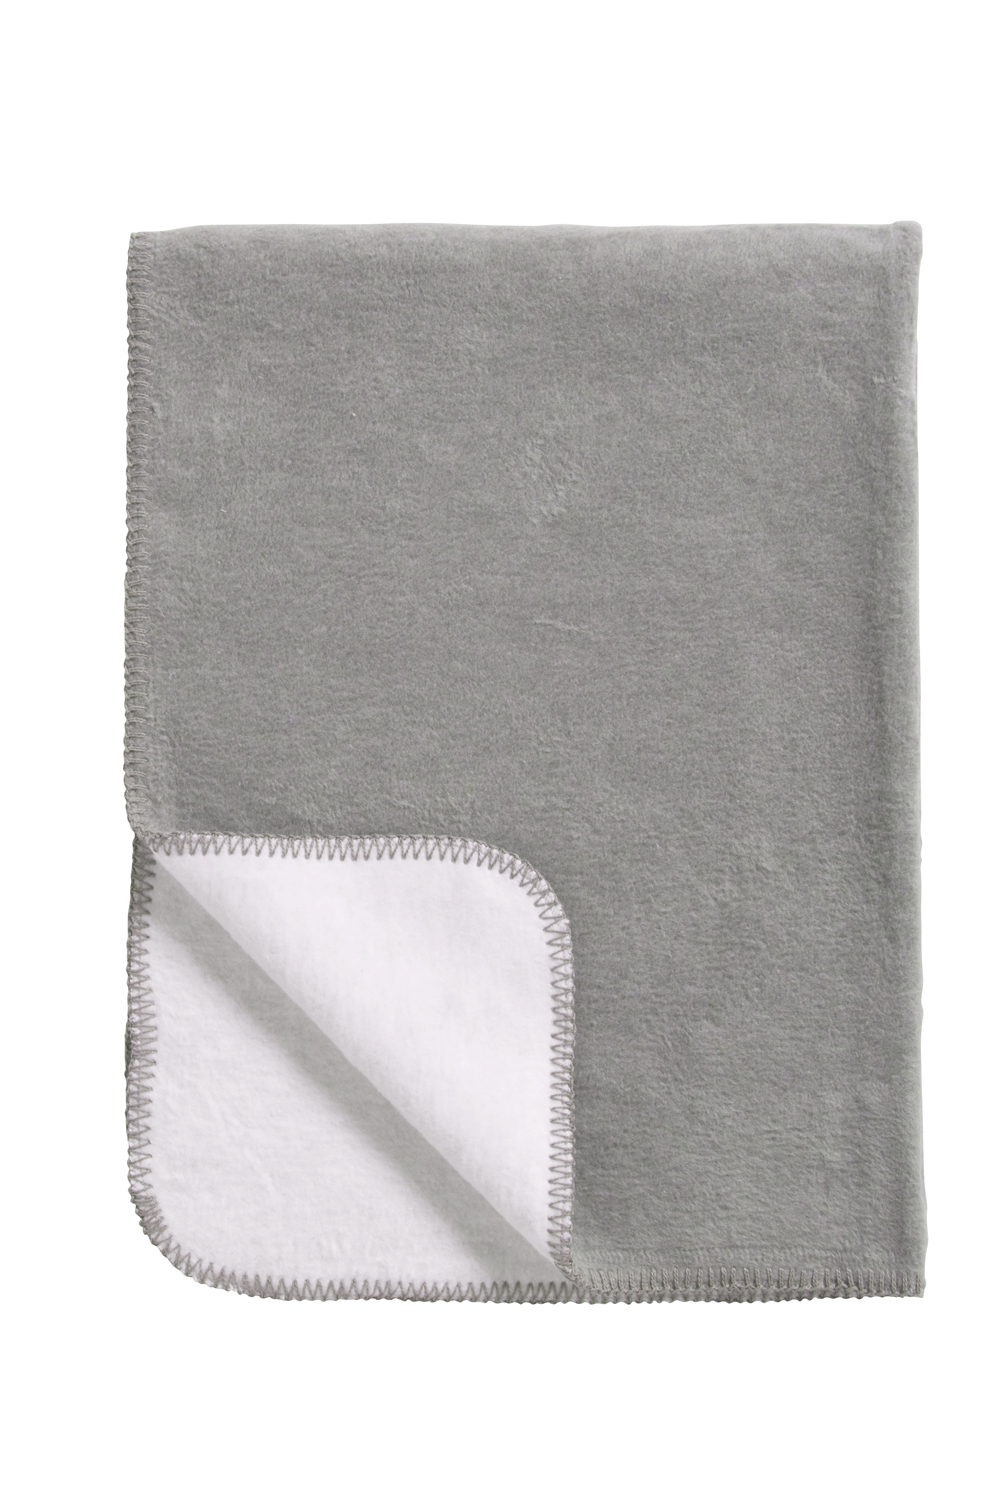 Cot Bed Blanket Double Face - Grey/White - 100X150cm